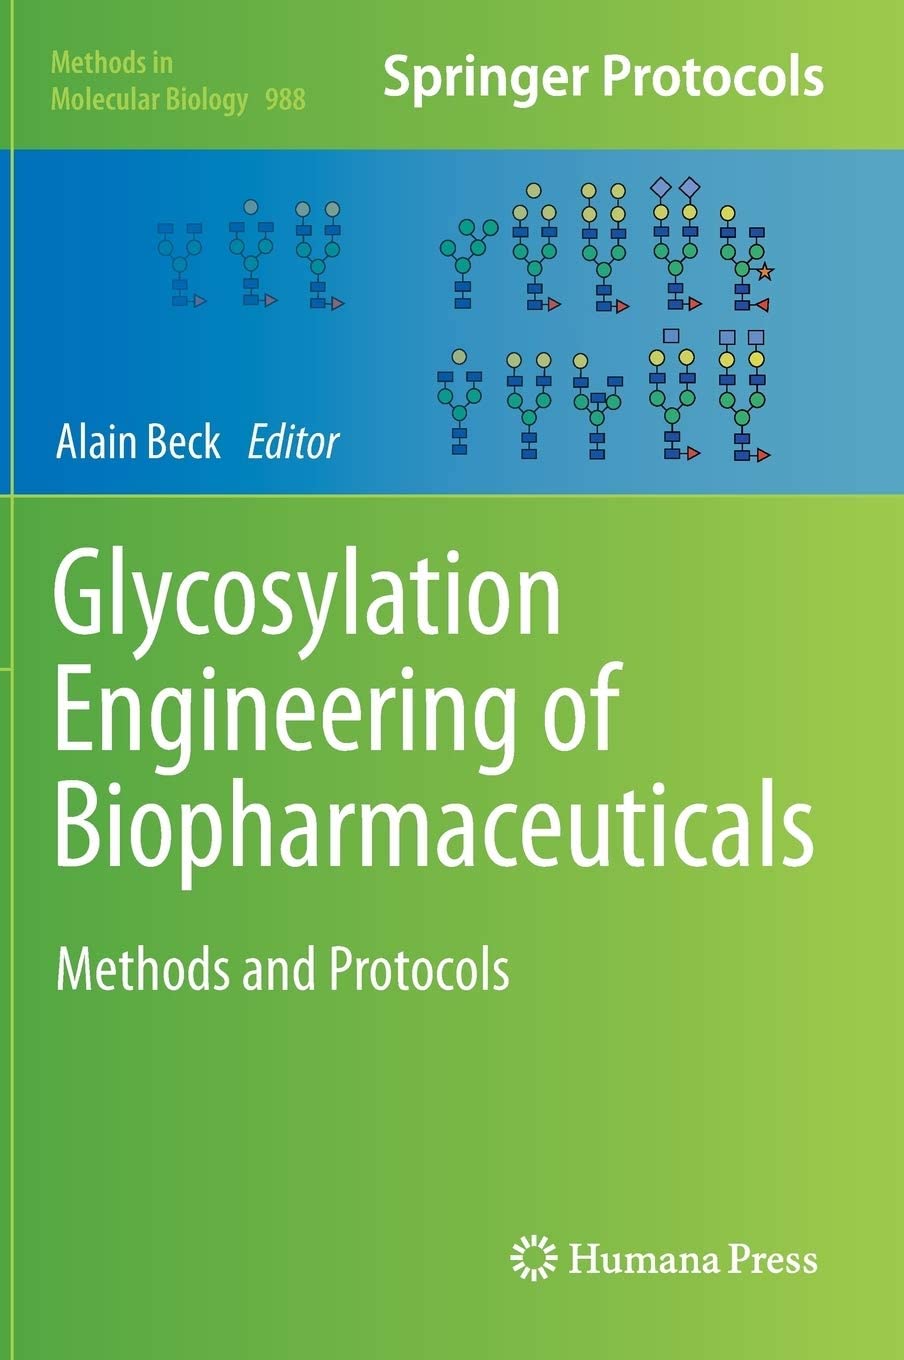 Glycosylation Engineering of Biopharmaceuticals: Methods and Protocols (Methods in Molecular Biology, 988)